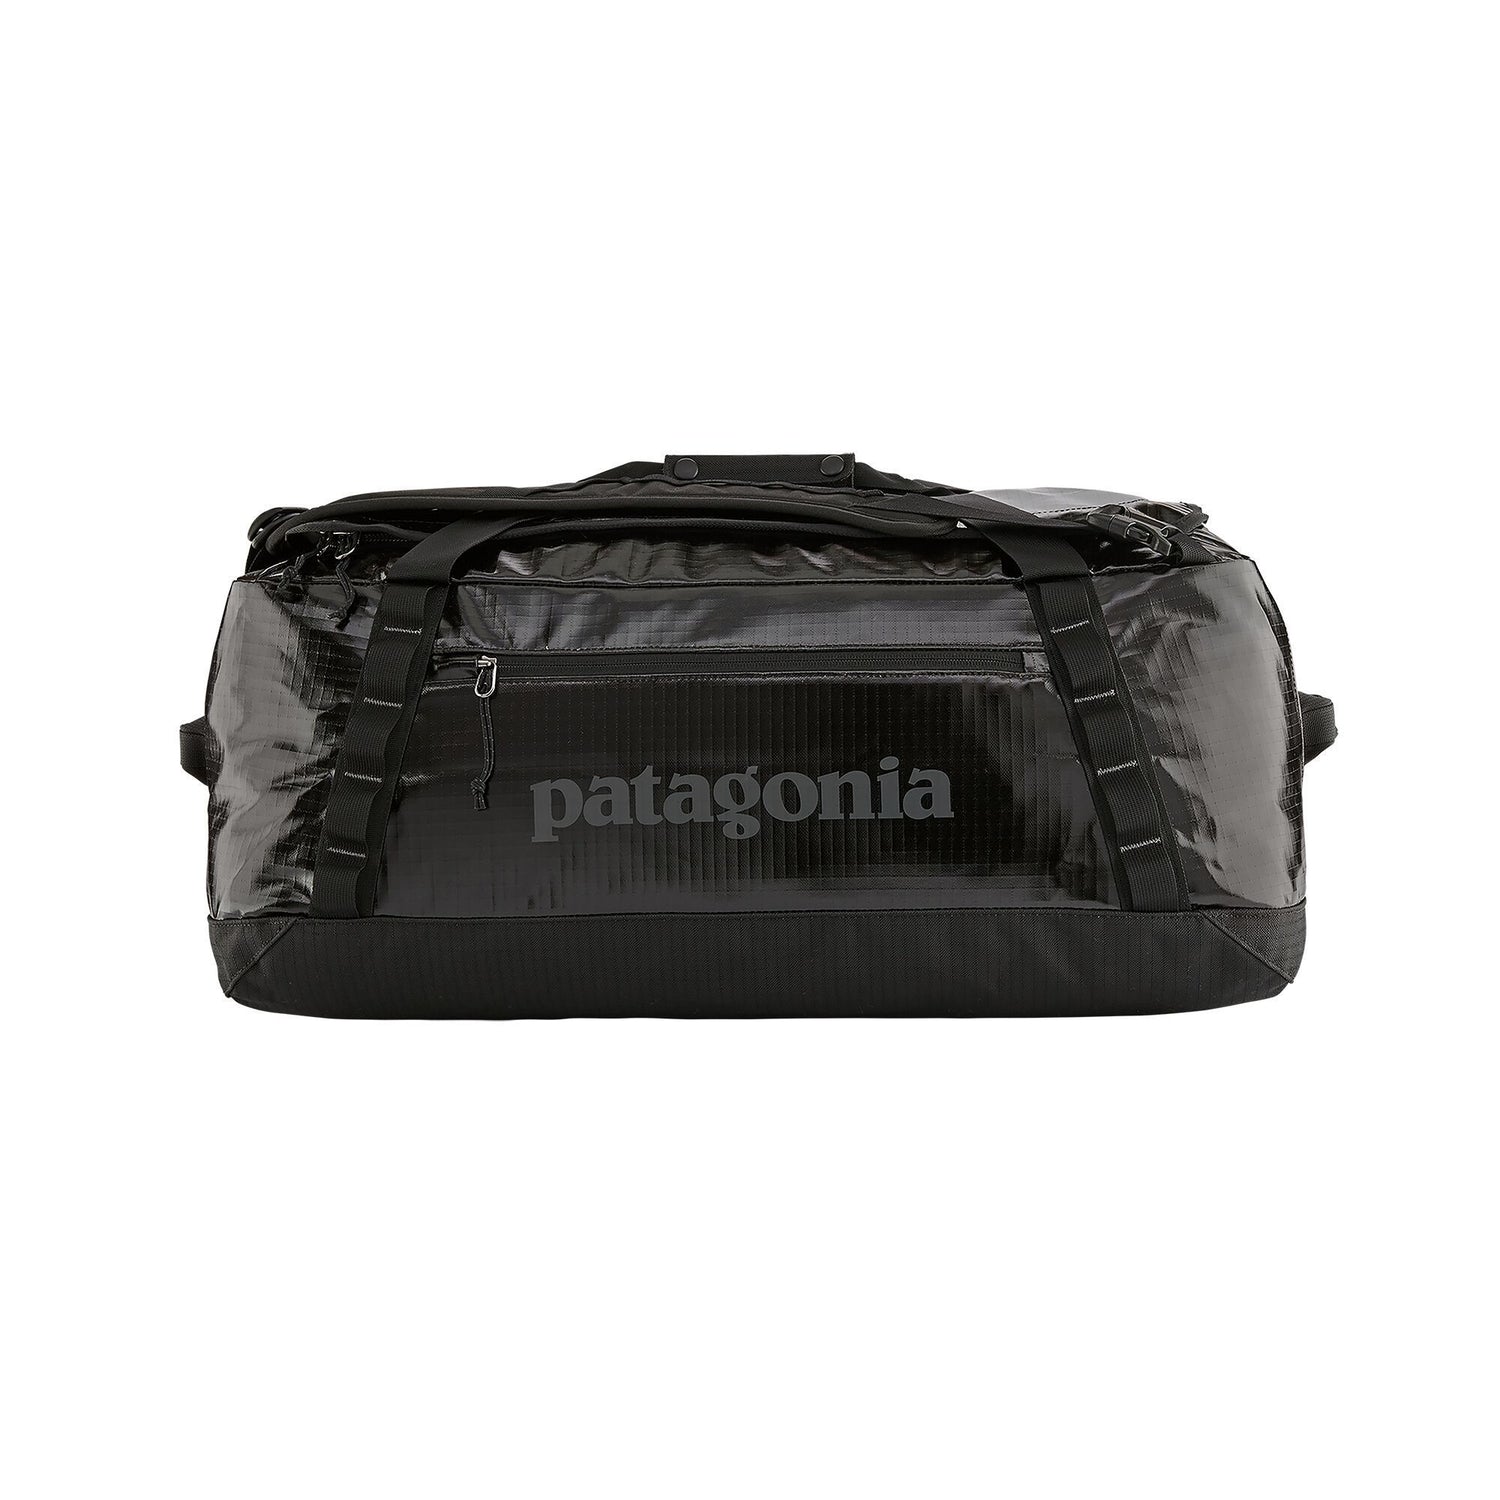 Patagonia Black Hole Duffel Bag 55L - 100 % Recycled Polyester Black Bags